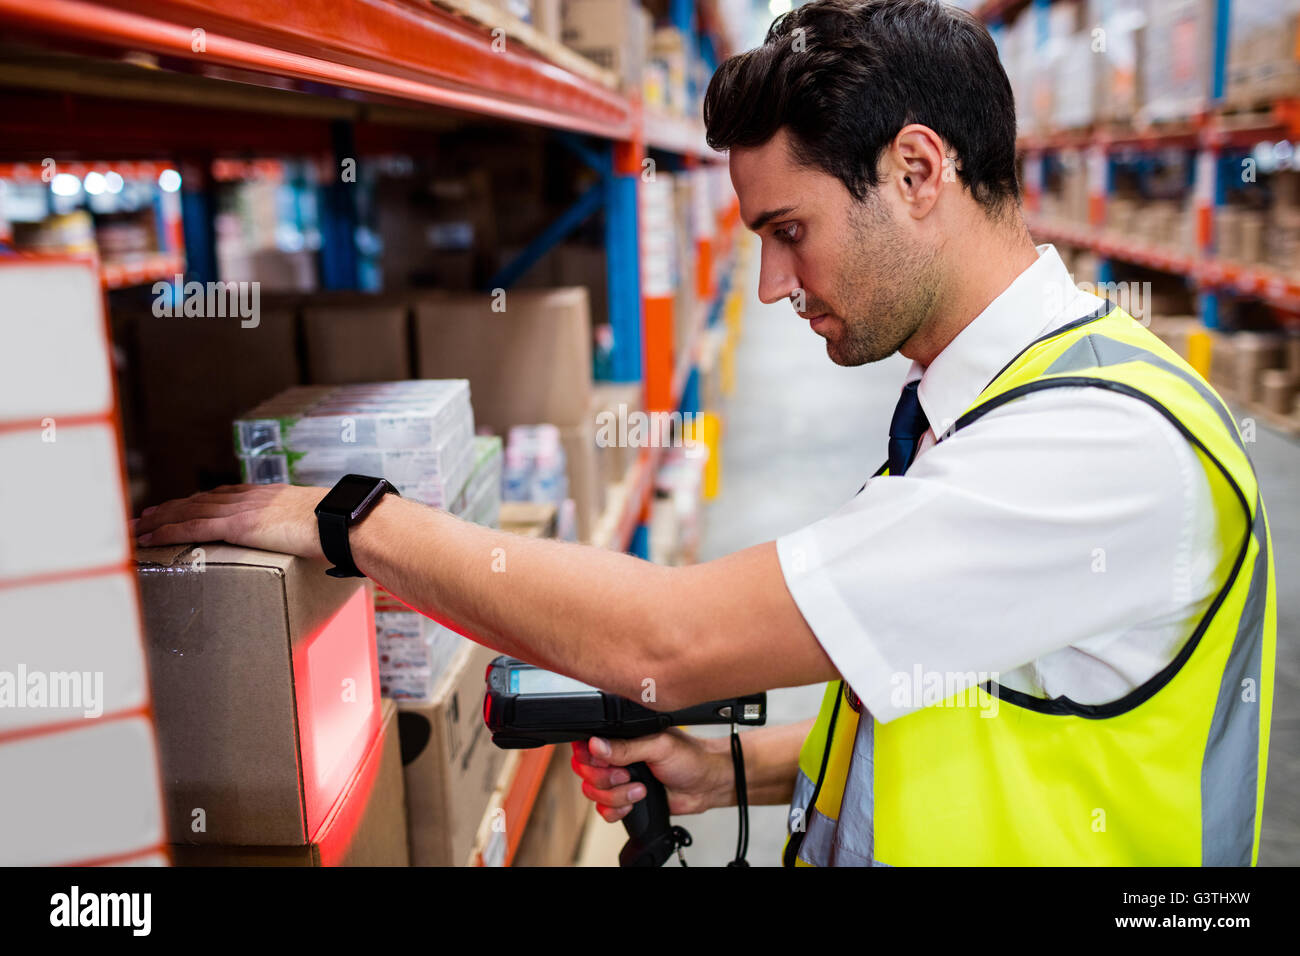 Warehouse manager with yellow coat scanning barcode on box Stock Photo